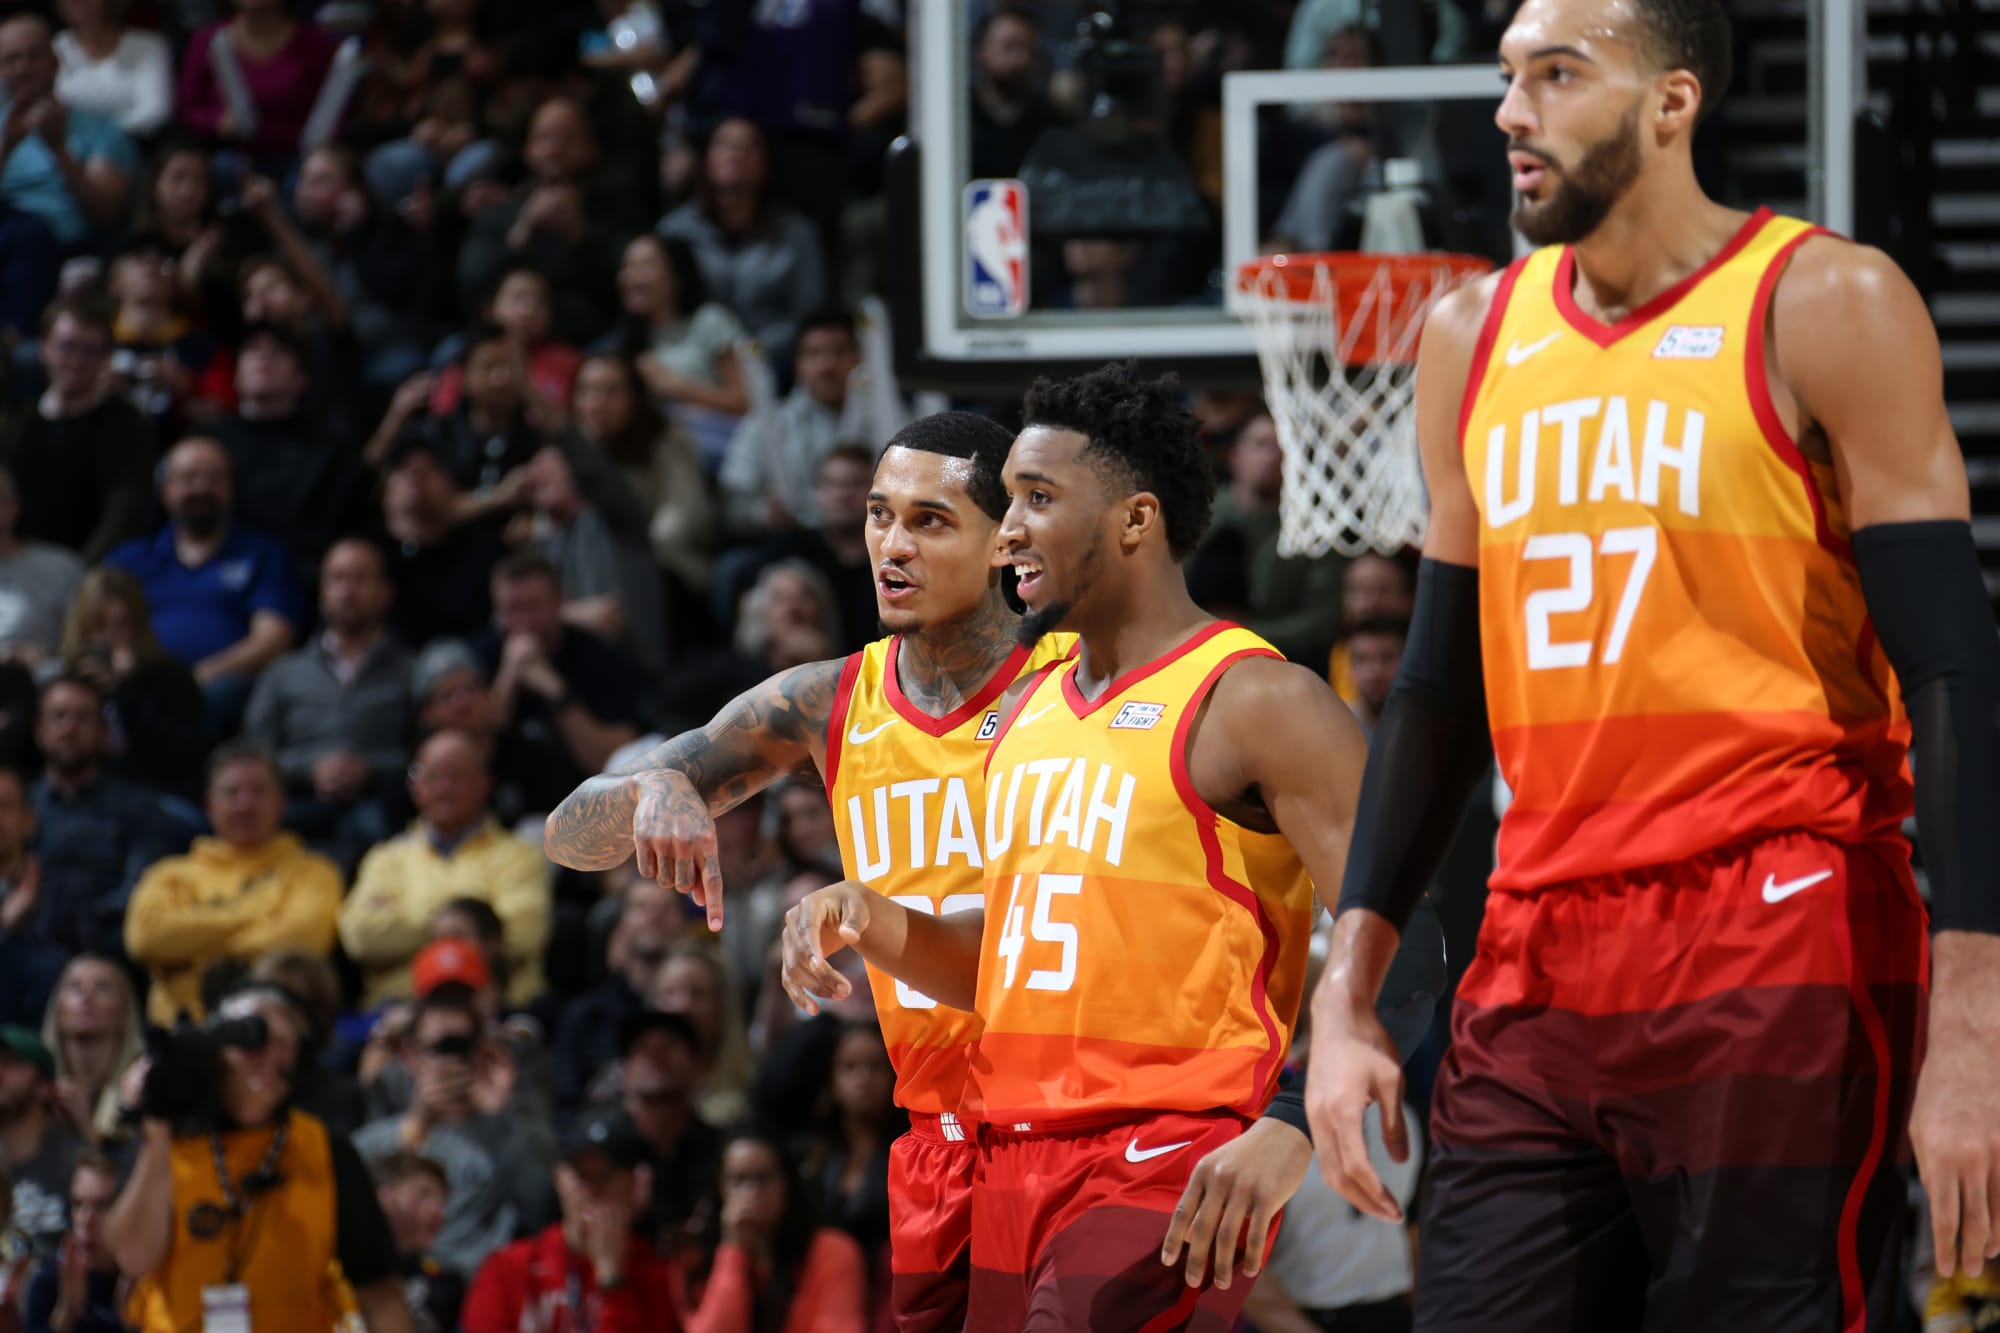 The Utah Jazz will have a very busy and impactful year in 2020